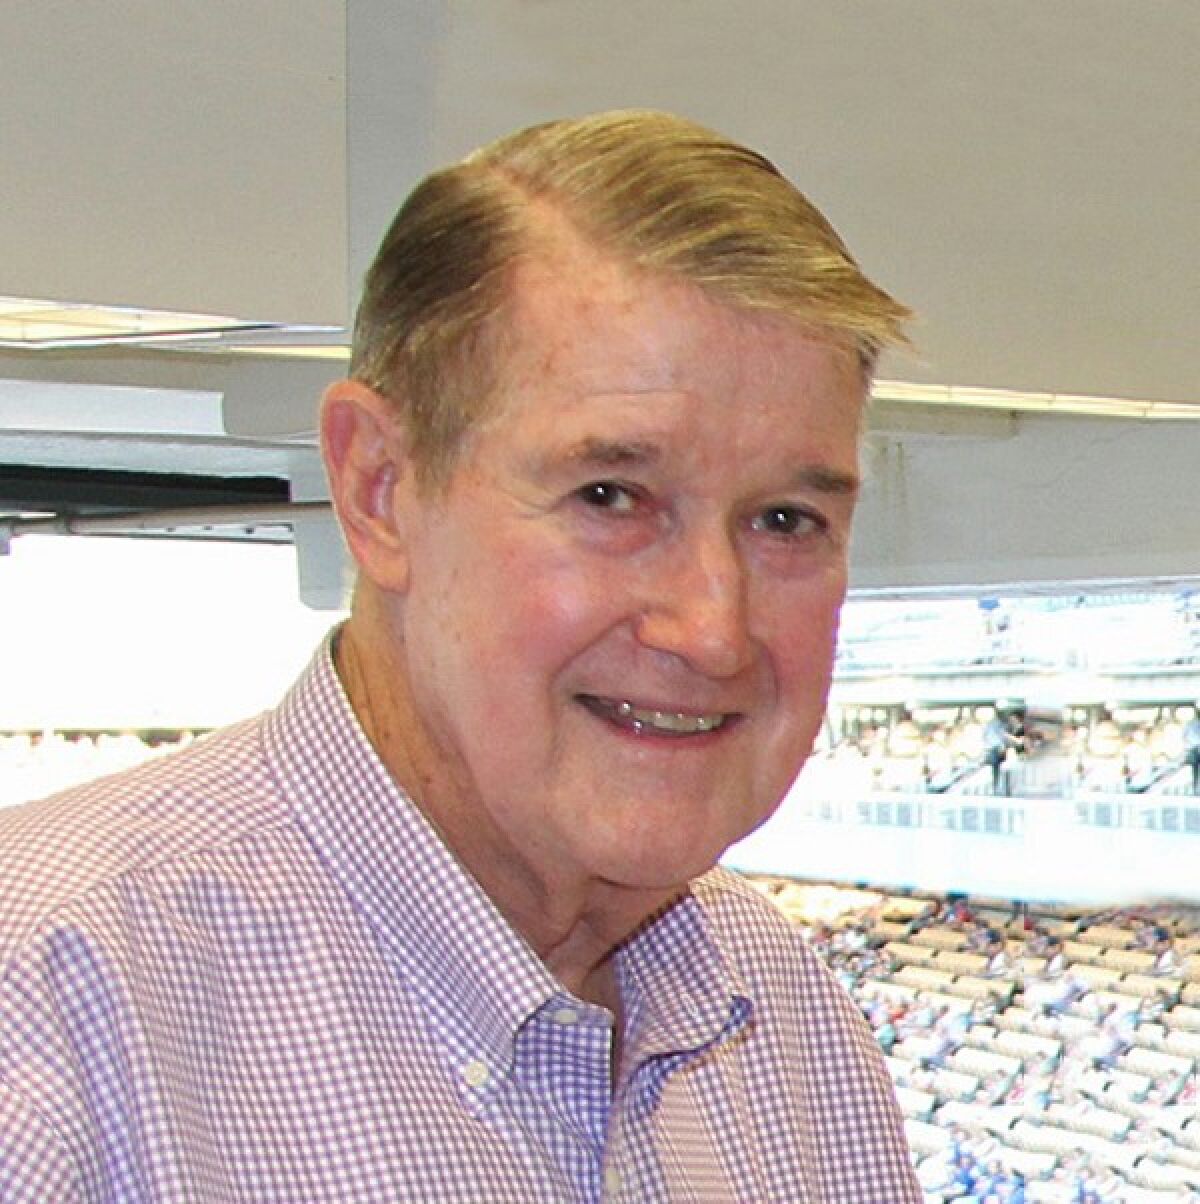 Former Dodgers owner Peter O'Malley.